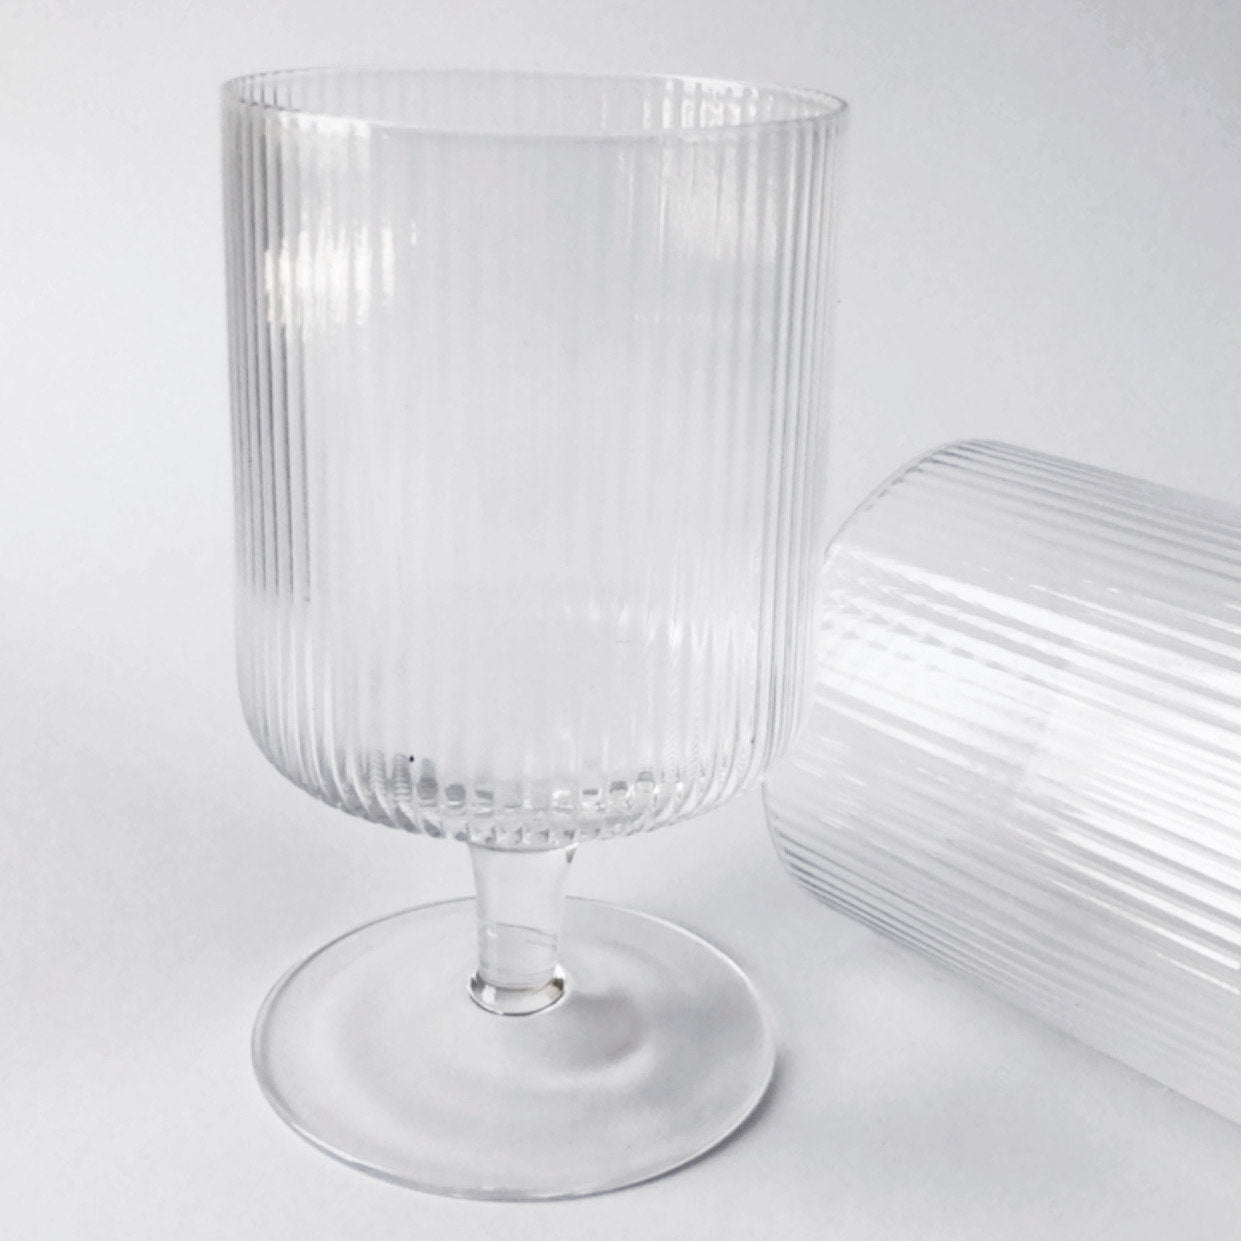 Ribbed Wine Glass set in a clear glass